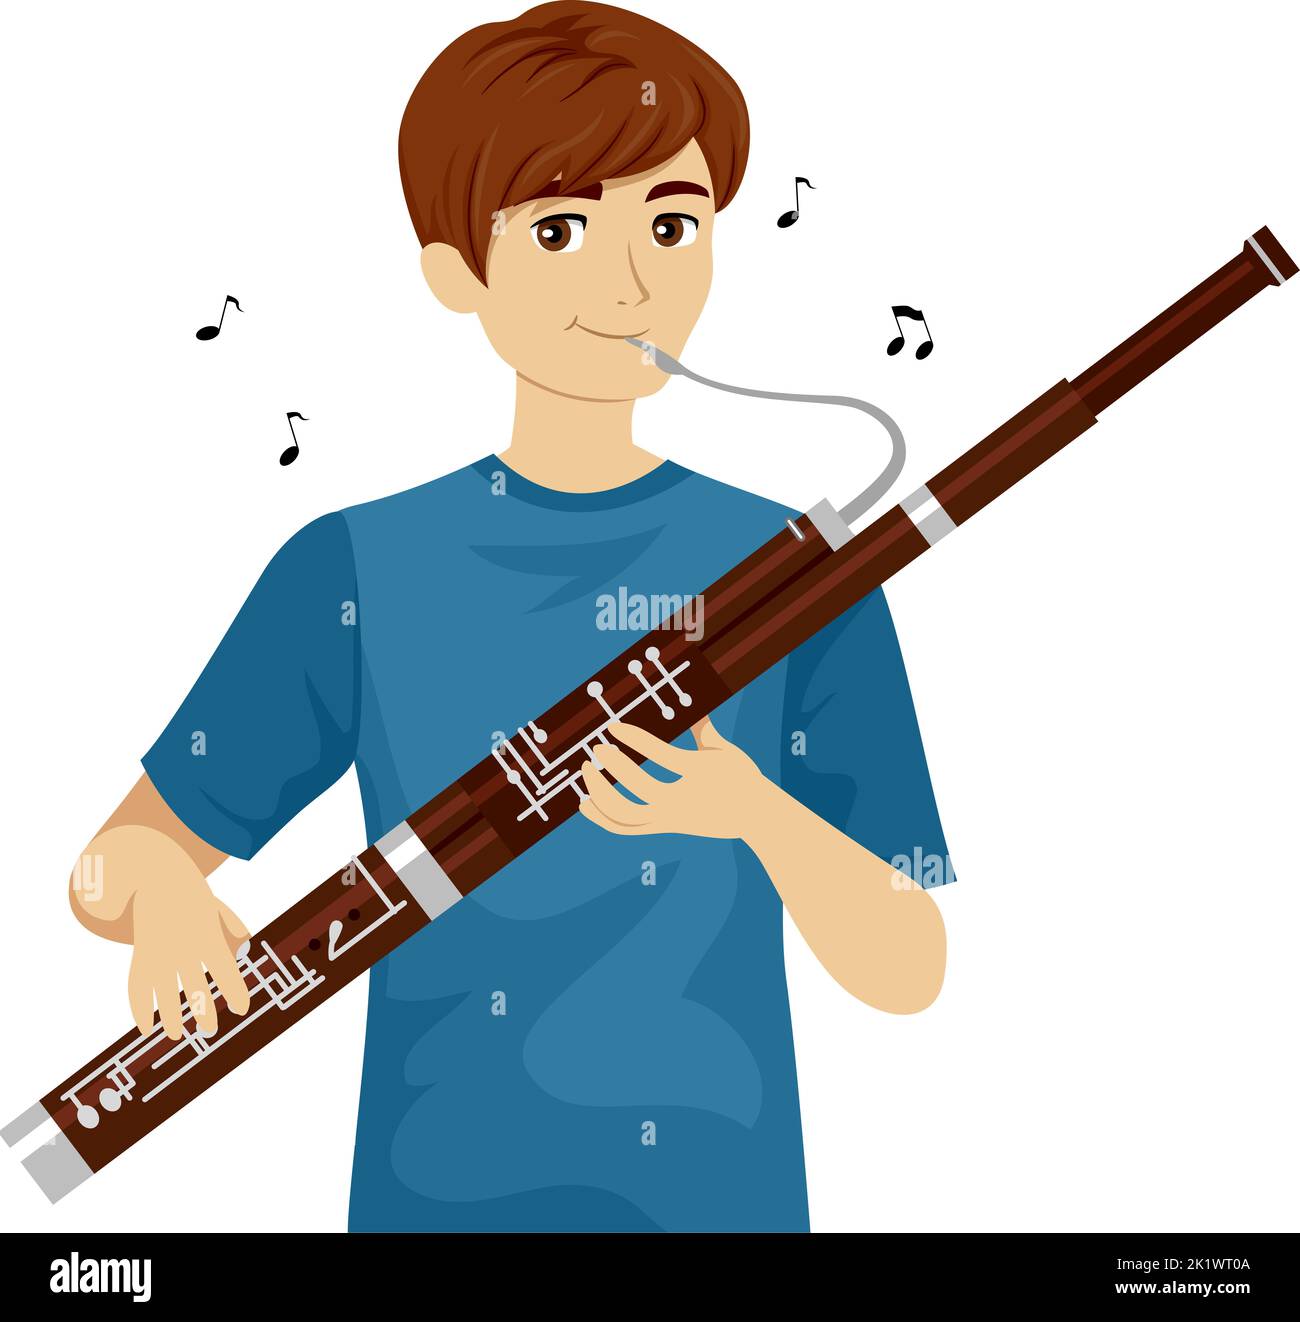 Illustration of Teen Guy Holding and Playing Bassoon Instrument with Musical Notes Floating Around Stock Photo